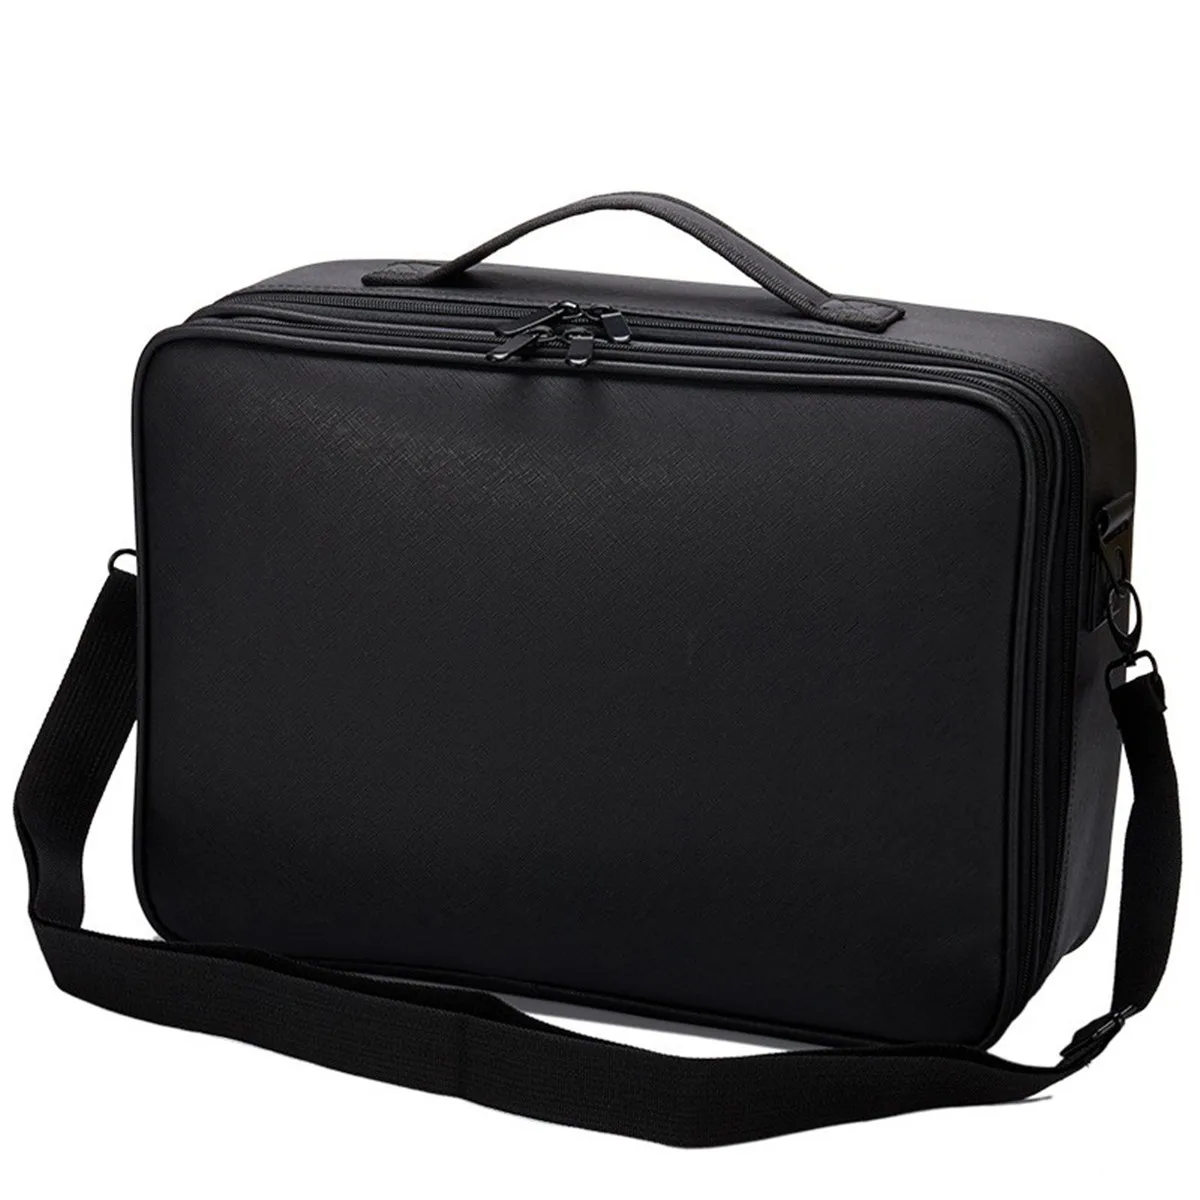 Woman PU Cosmetic Case Makeup Storage Bag Shoulder Handbag Travel Knapsack Make Up Waterproof Box Suitcase Cosmetology Toolbox the woman in the case and other stories